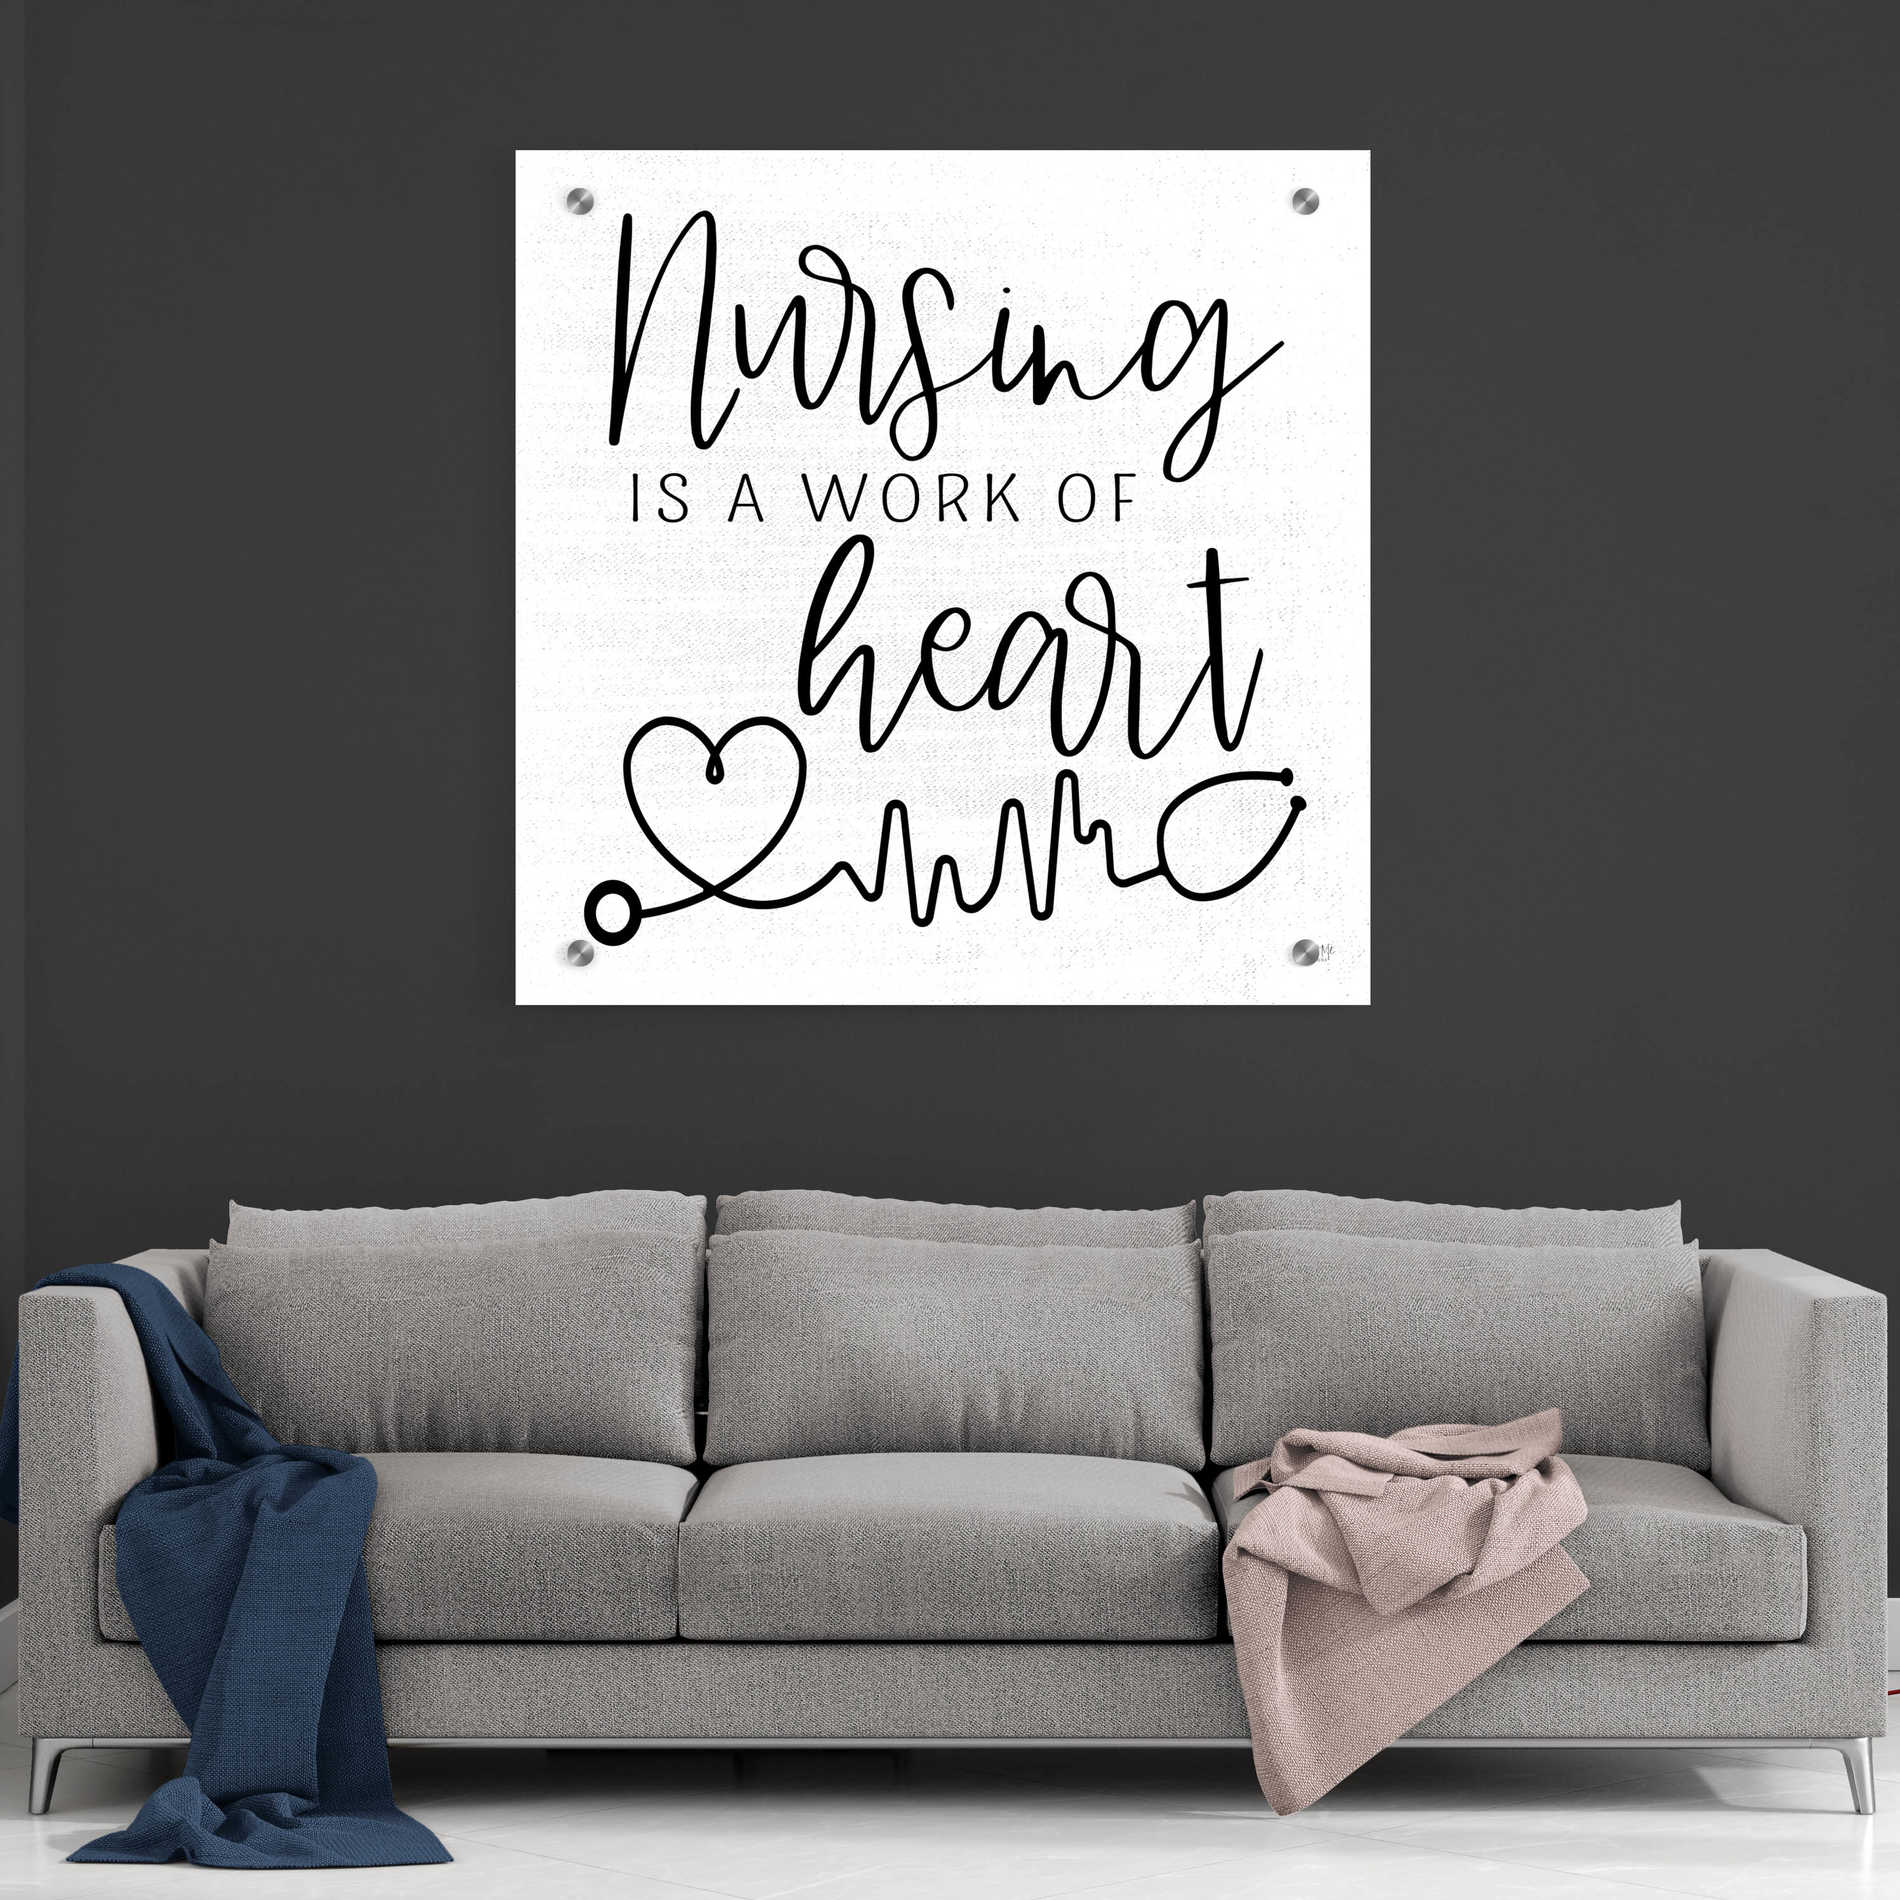 Epic Art 'Nursing a Work of Heart' by Lux + Me Designs, Acrylic Glass Wall Art,36x36